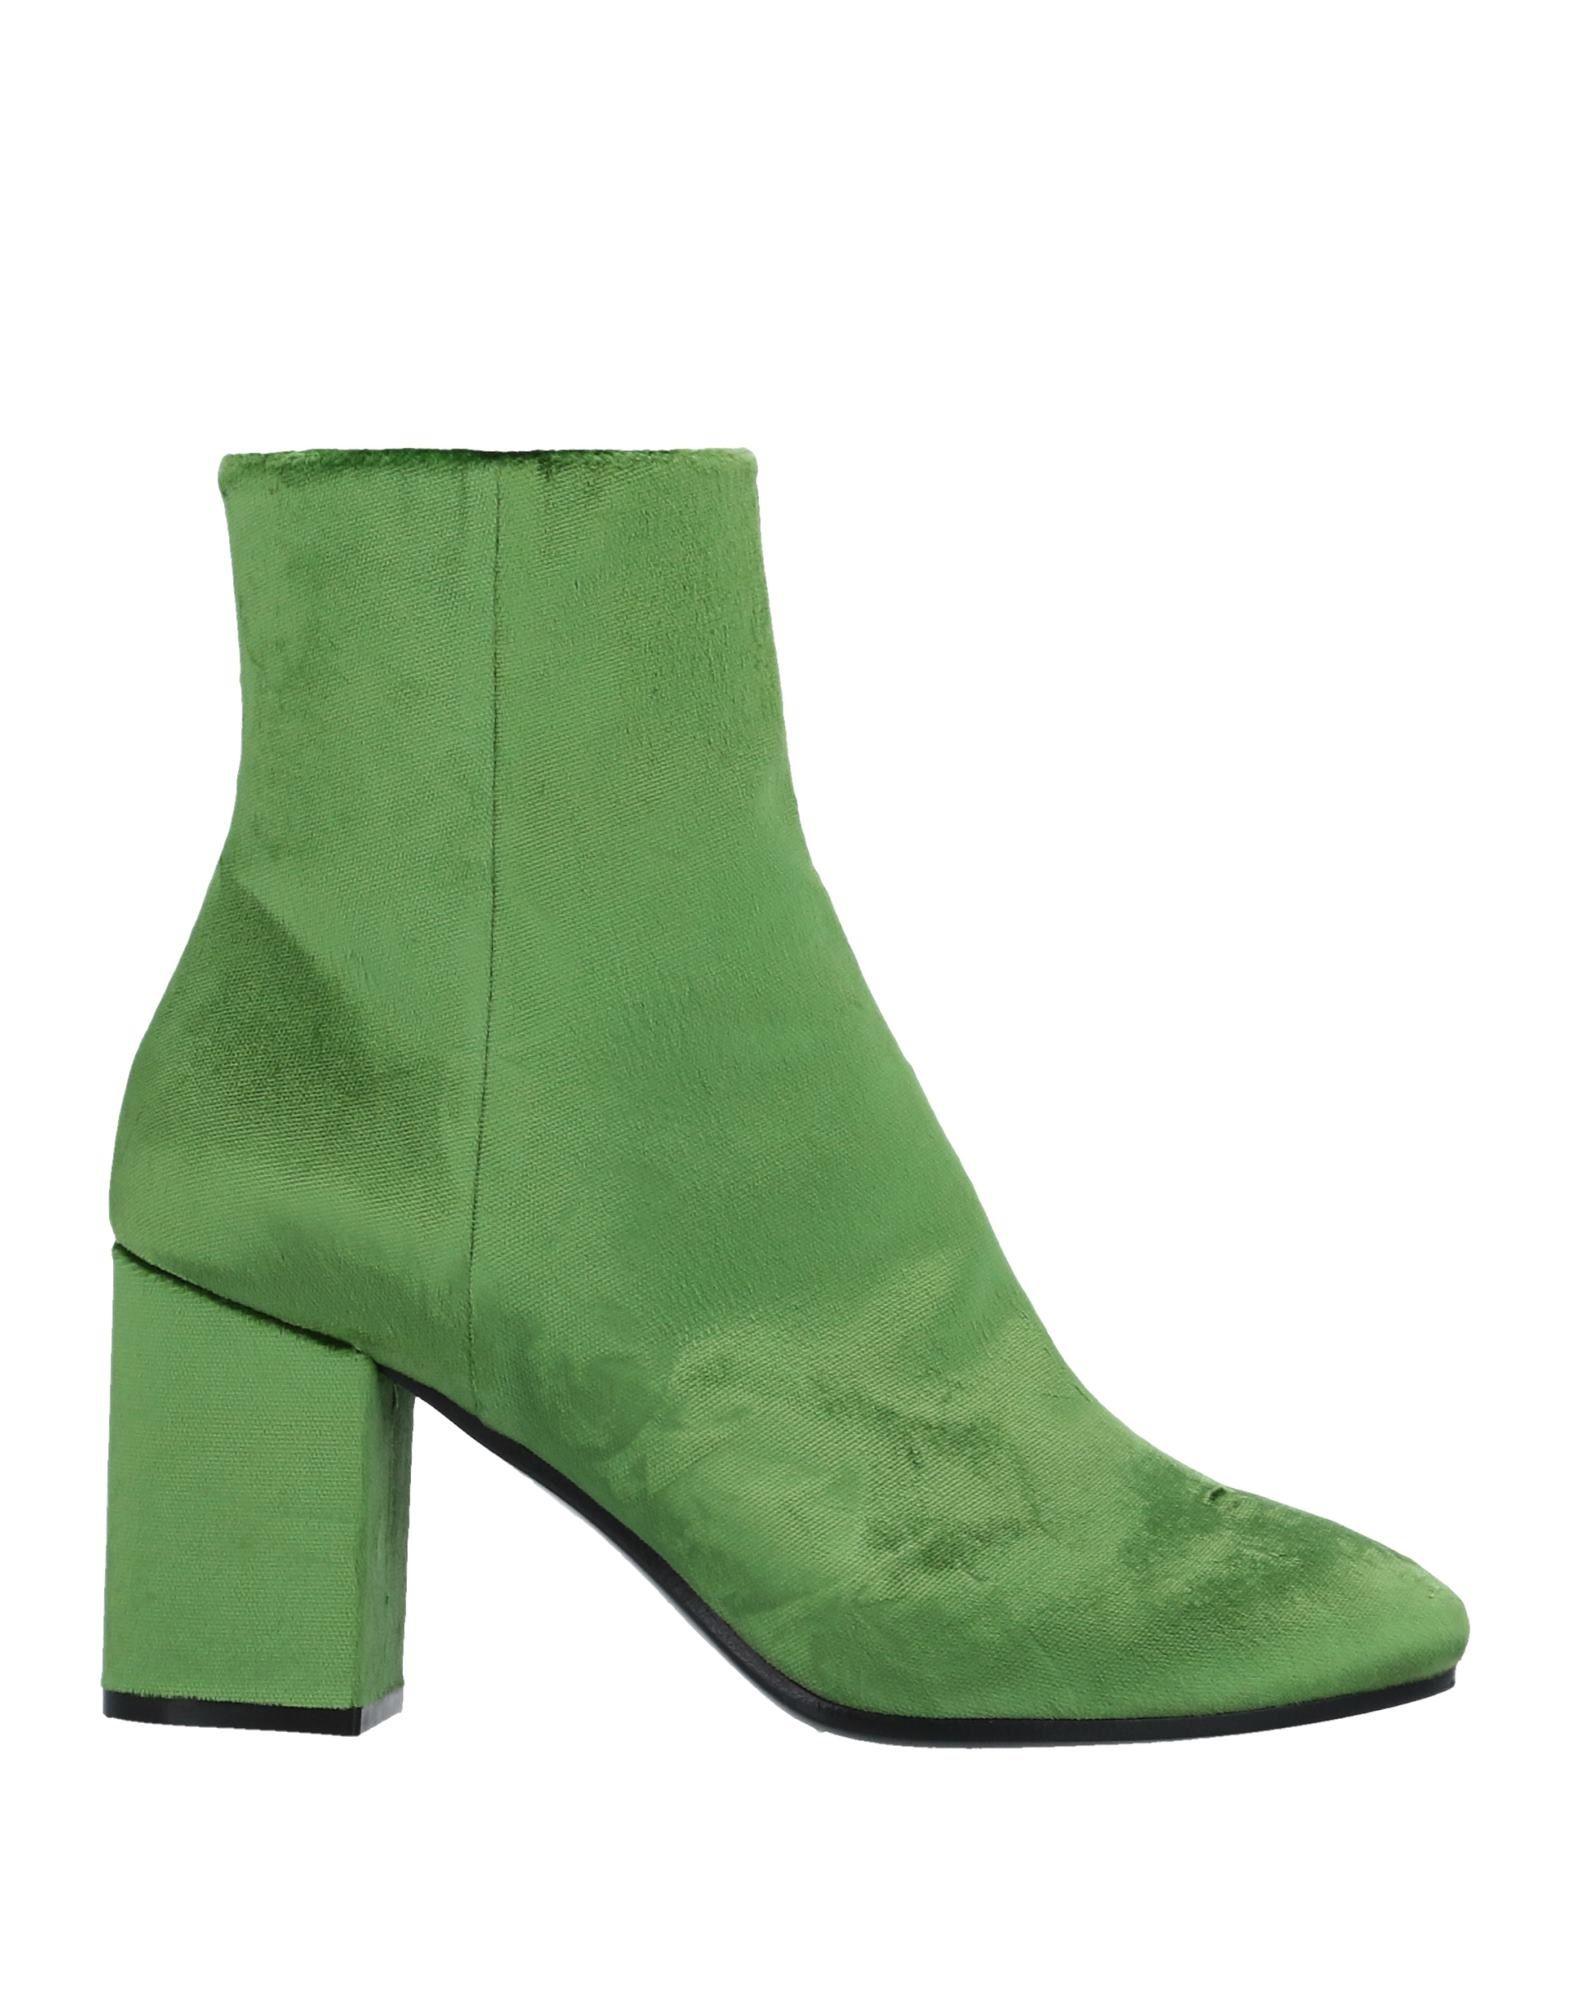 Balenciaga Leather Ankle Boots in Green - Lyst